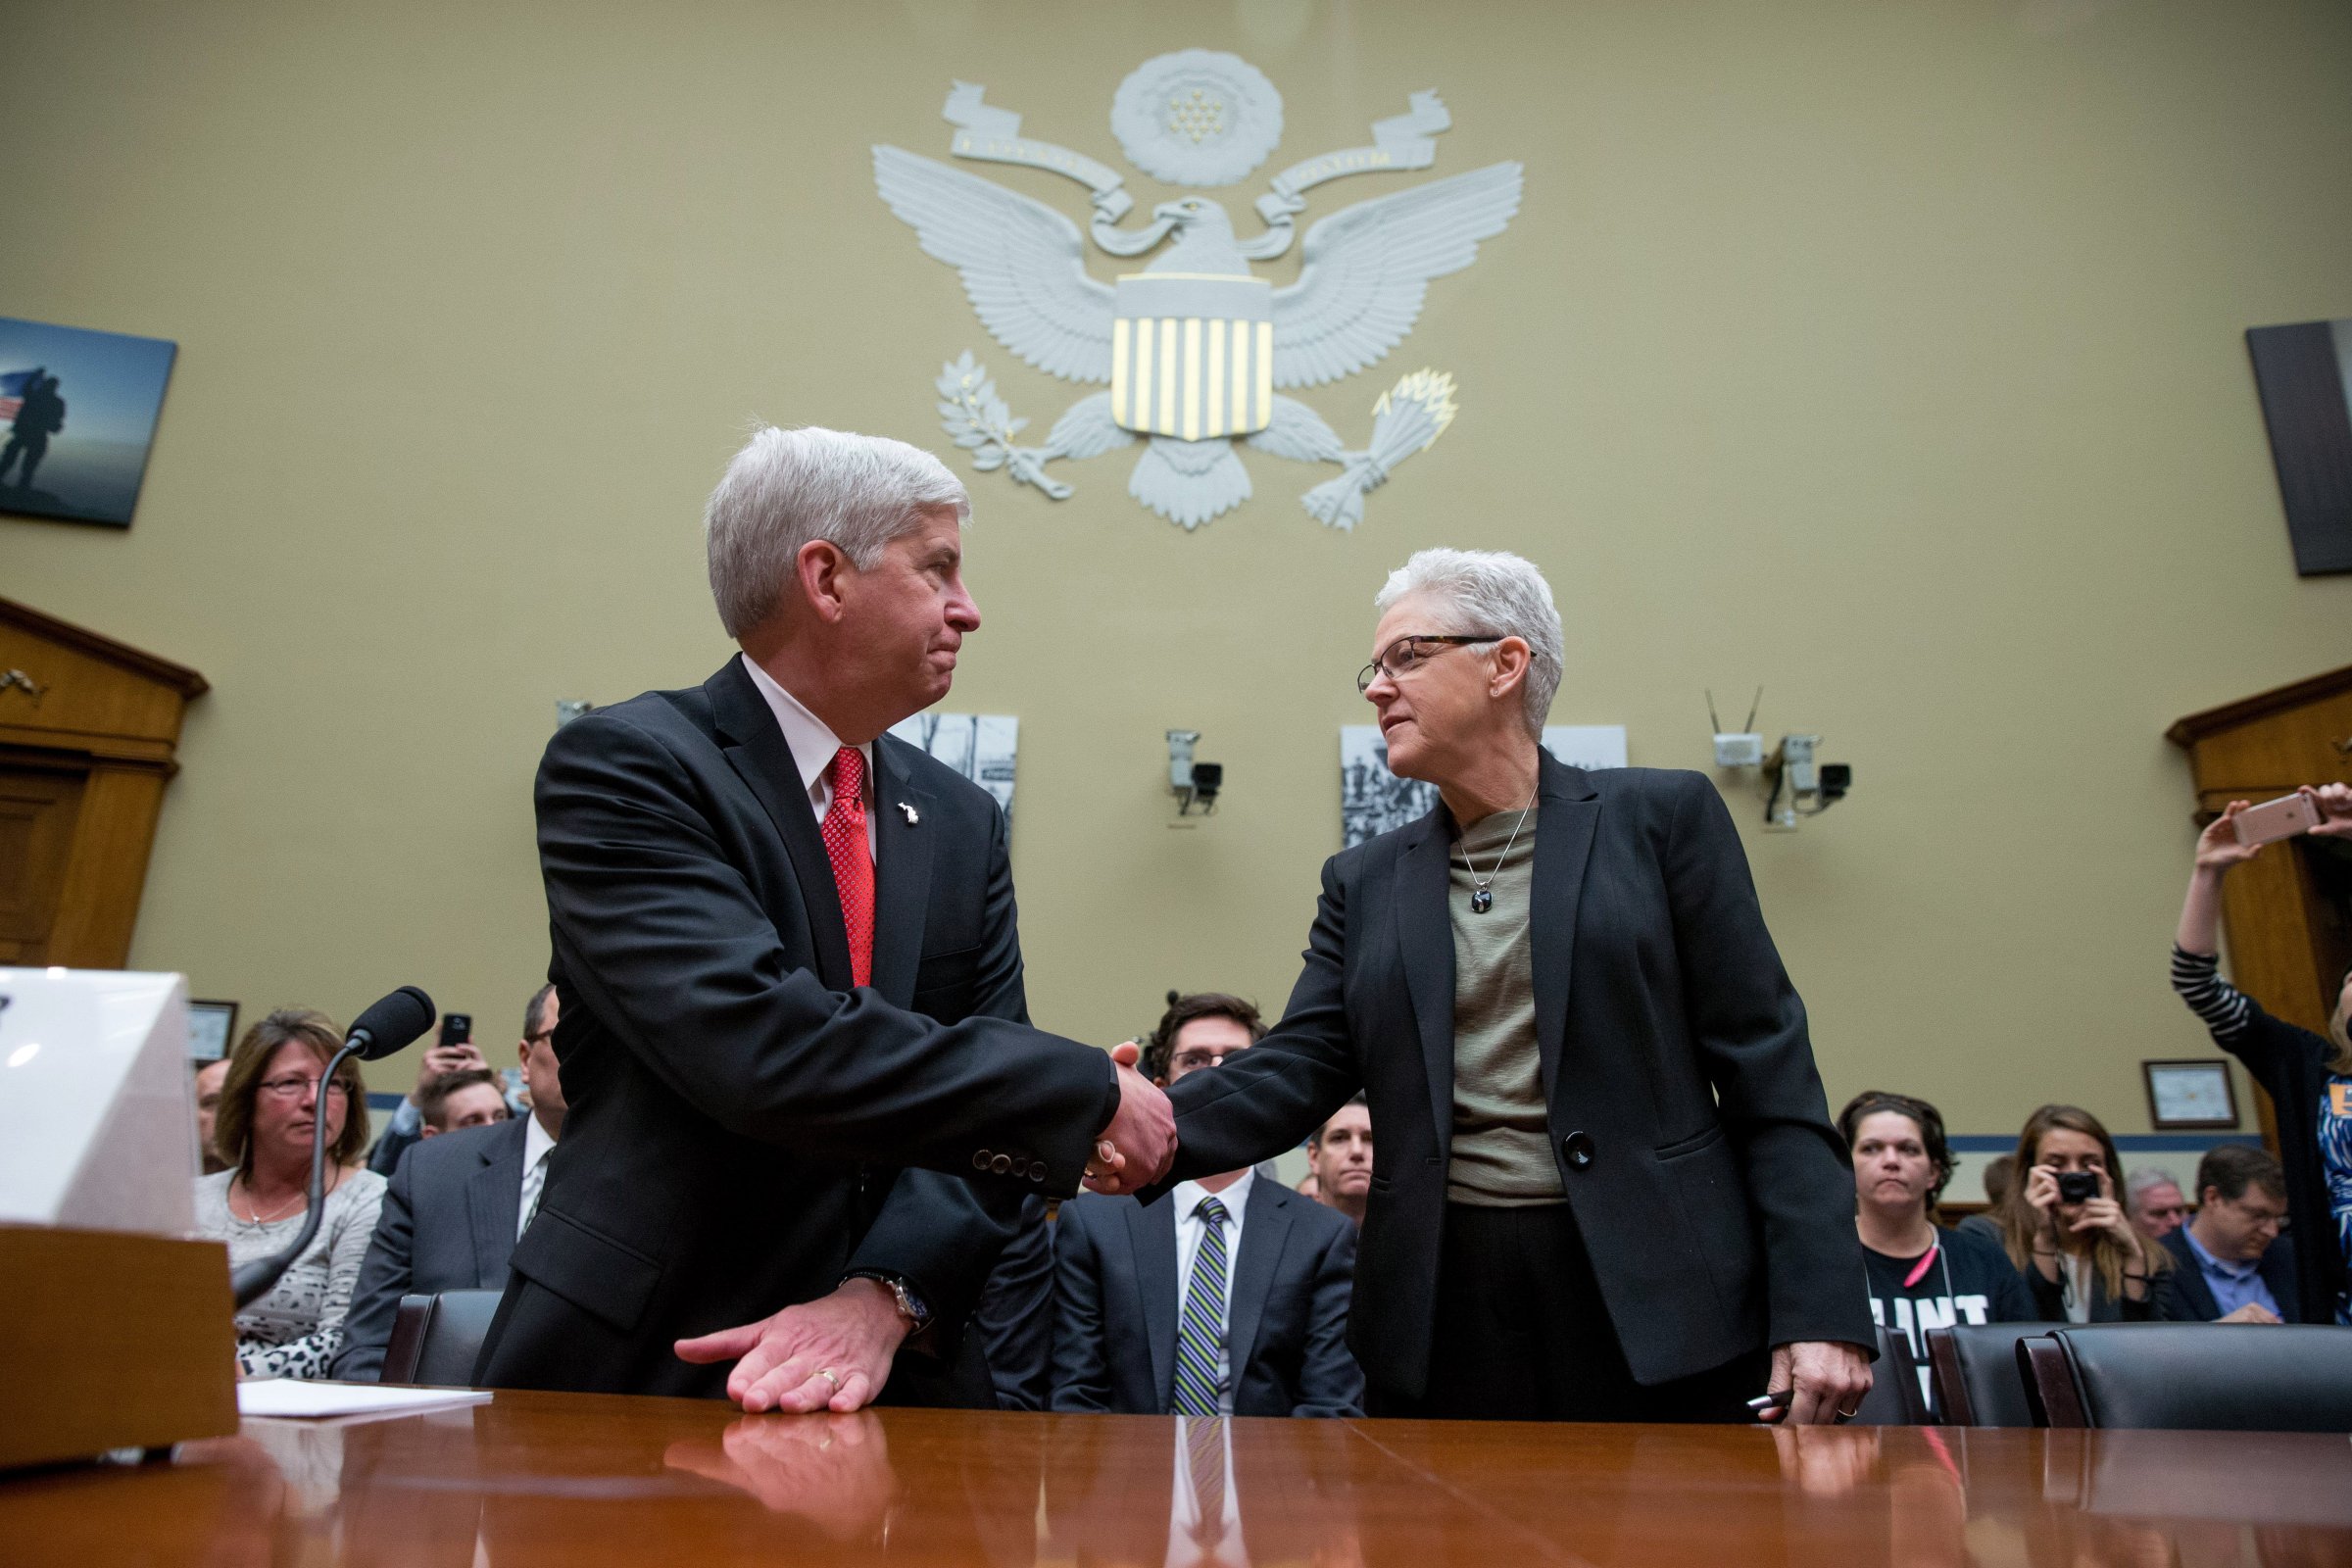 Michigan Gov. Rick Snyder and EPA Administrator Gina McCarthy greet each other as they arrive to testify before a House Oversight and Government Reform Committee hearing in Washington on March 17, 2016, to look into the circumstances surrounding high levels of lead found in many residents' tap water in Flint, Michigan.